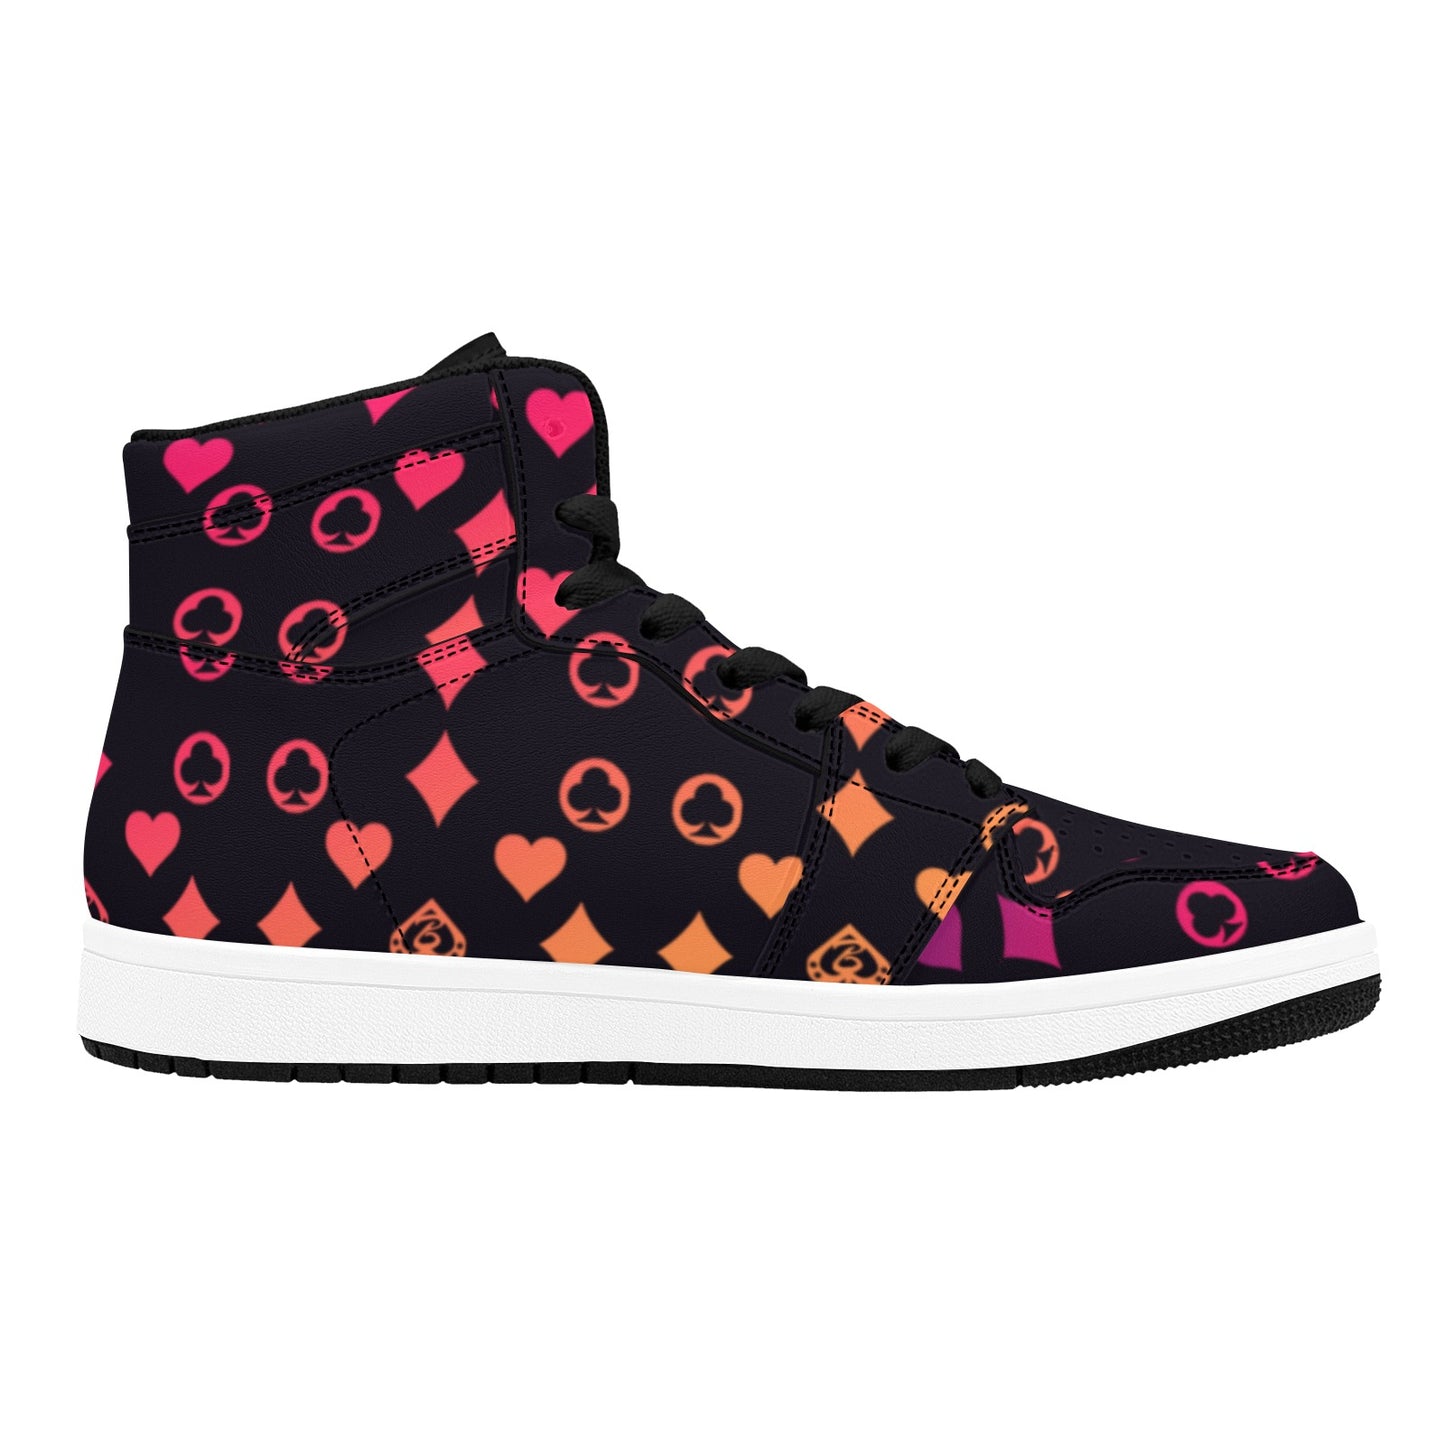 Black High Top Sneakers Colorful Shapes Pattern High Top Sneakers Men's High Top Sneakers